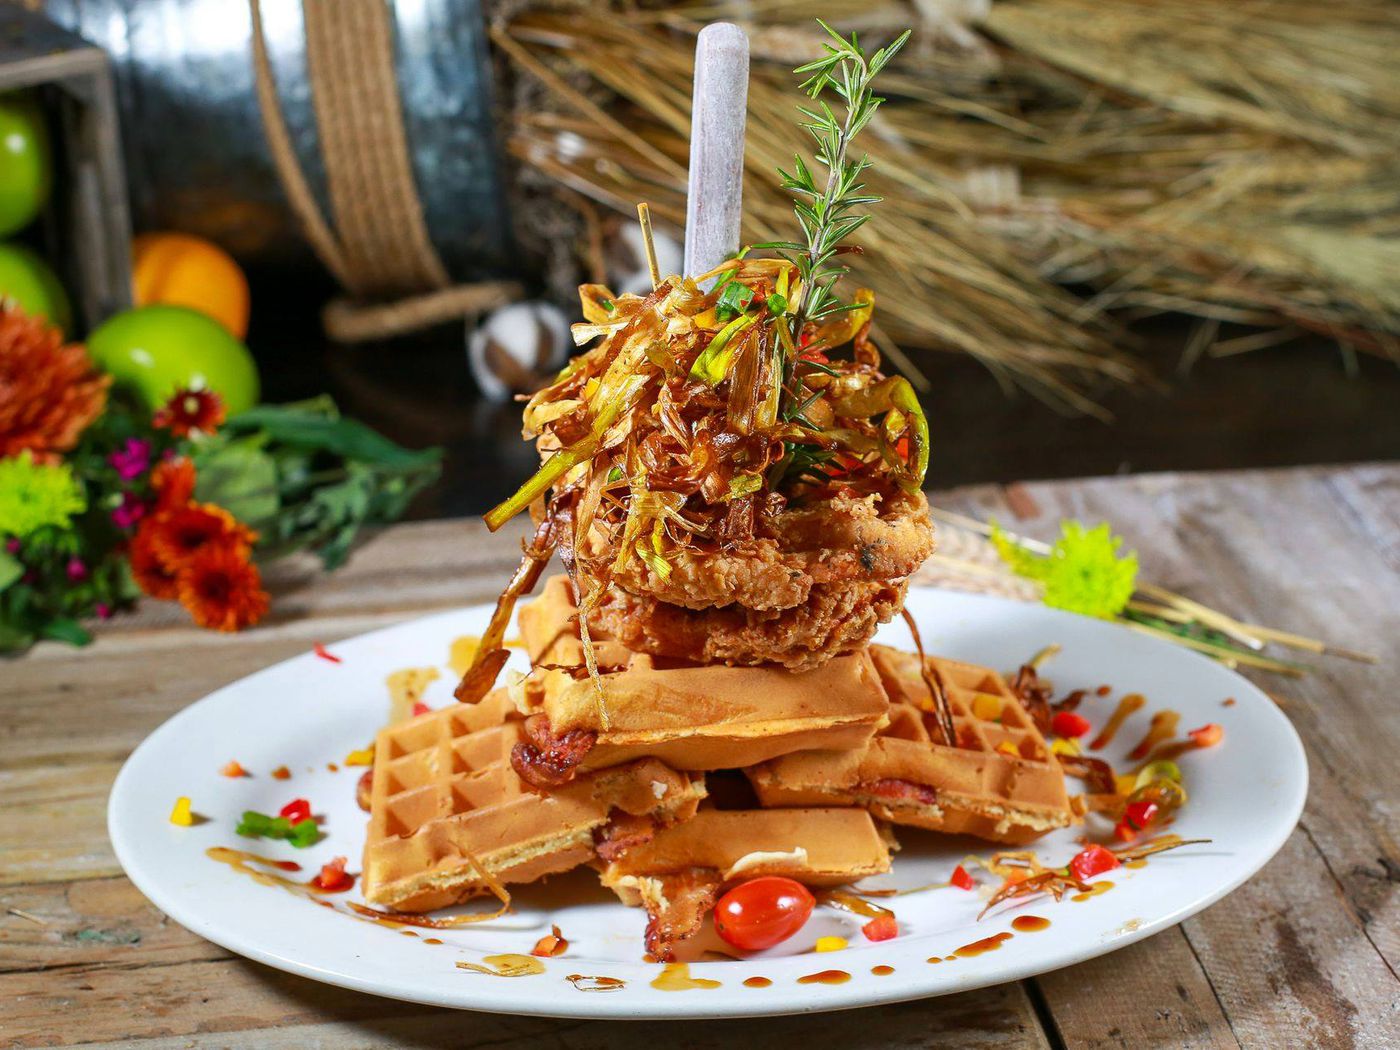 10 Best Chicken And Waffles In Las Vegas 2023 - Buyer's Guide